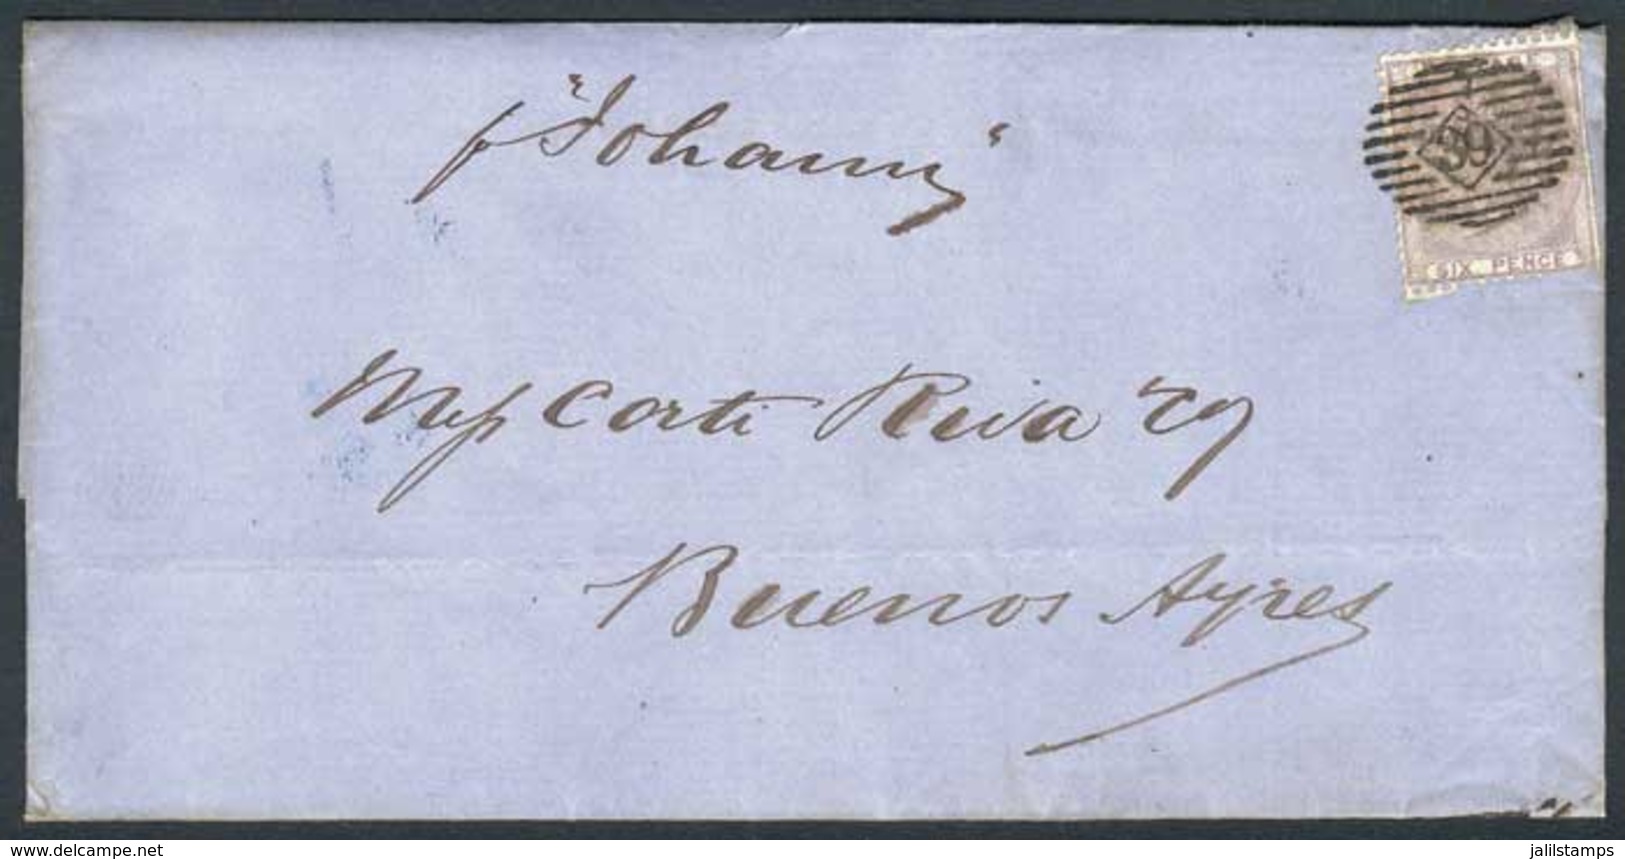 GREAT BRITAIN: 9/DEC/1860 ? - ARGENTINA: Folded Cover Franked By Sc.27, With Numeral "39" Cancel, Sent To Buenos Aires.  - ...-1840 Precursores